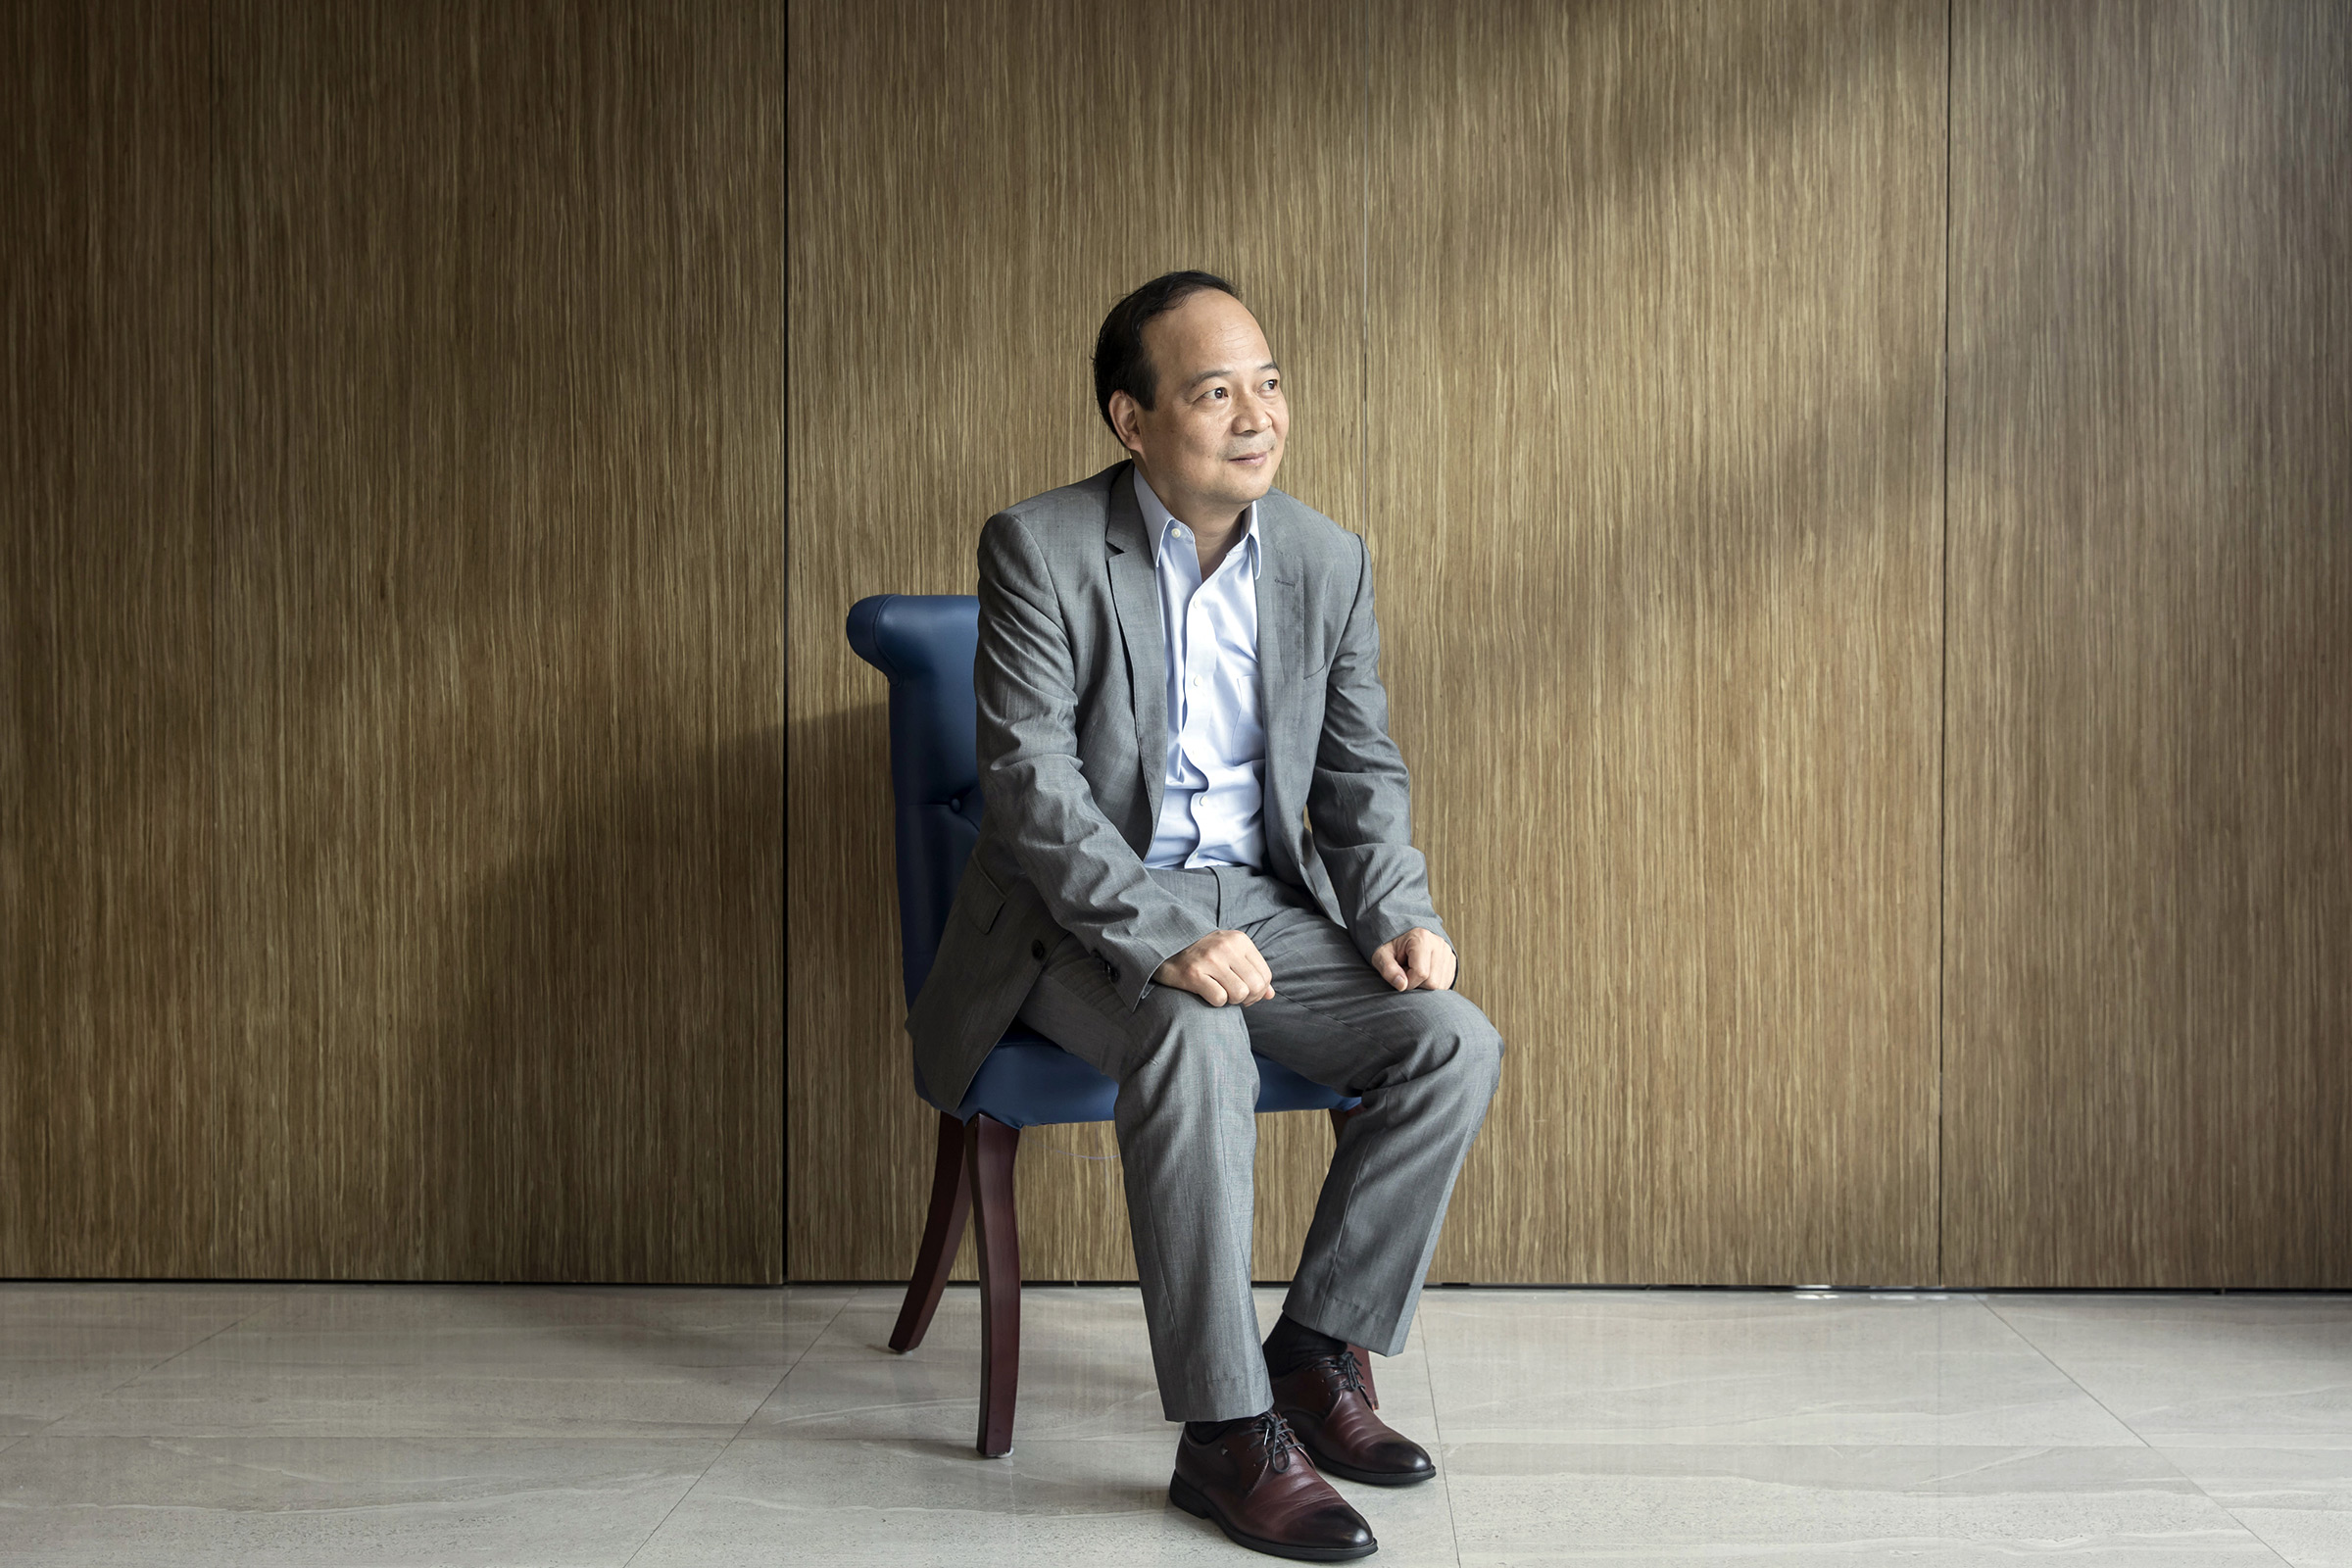 Zeng Yuqun, chairman of Contemporary Amperex Technology Co. Ltd. (CATL), in Ningde, Fujian province, China, in 2020. (Qilai Shen—Bloomberg/Getty Images)